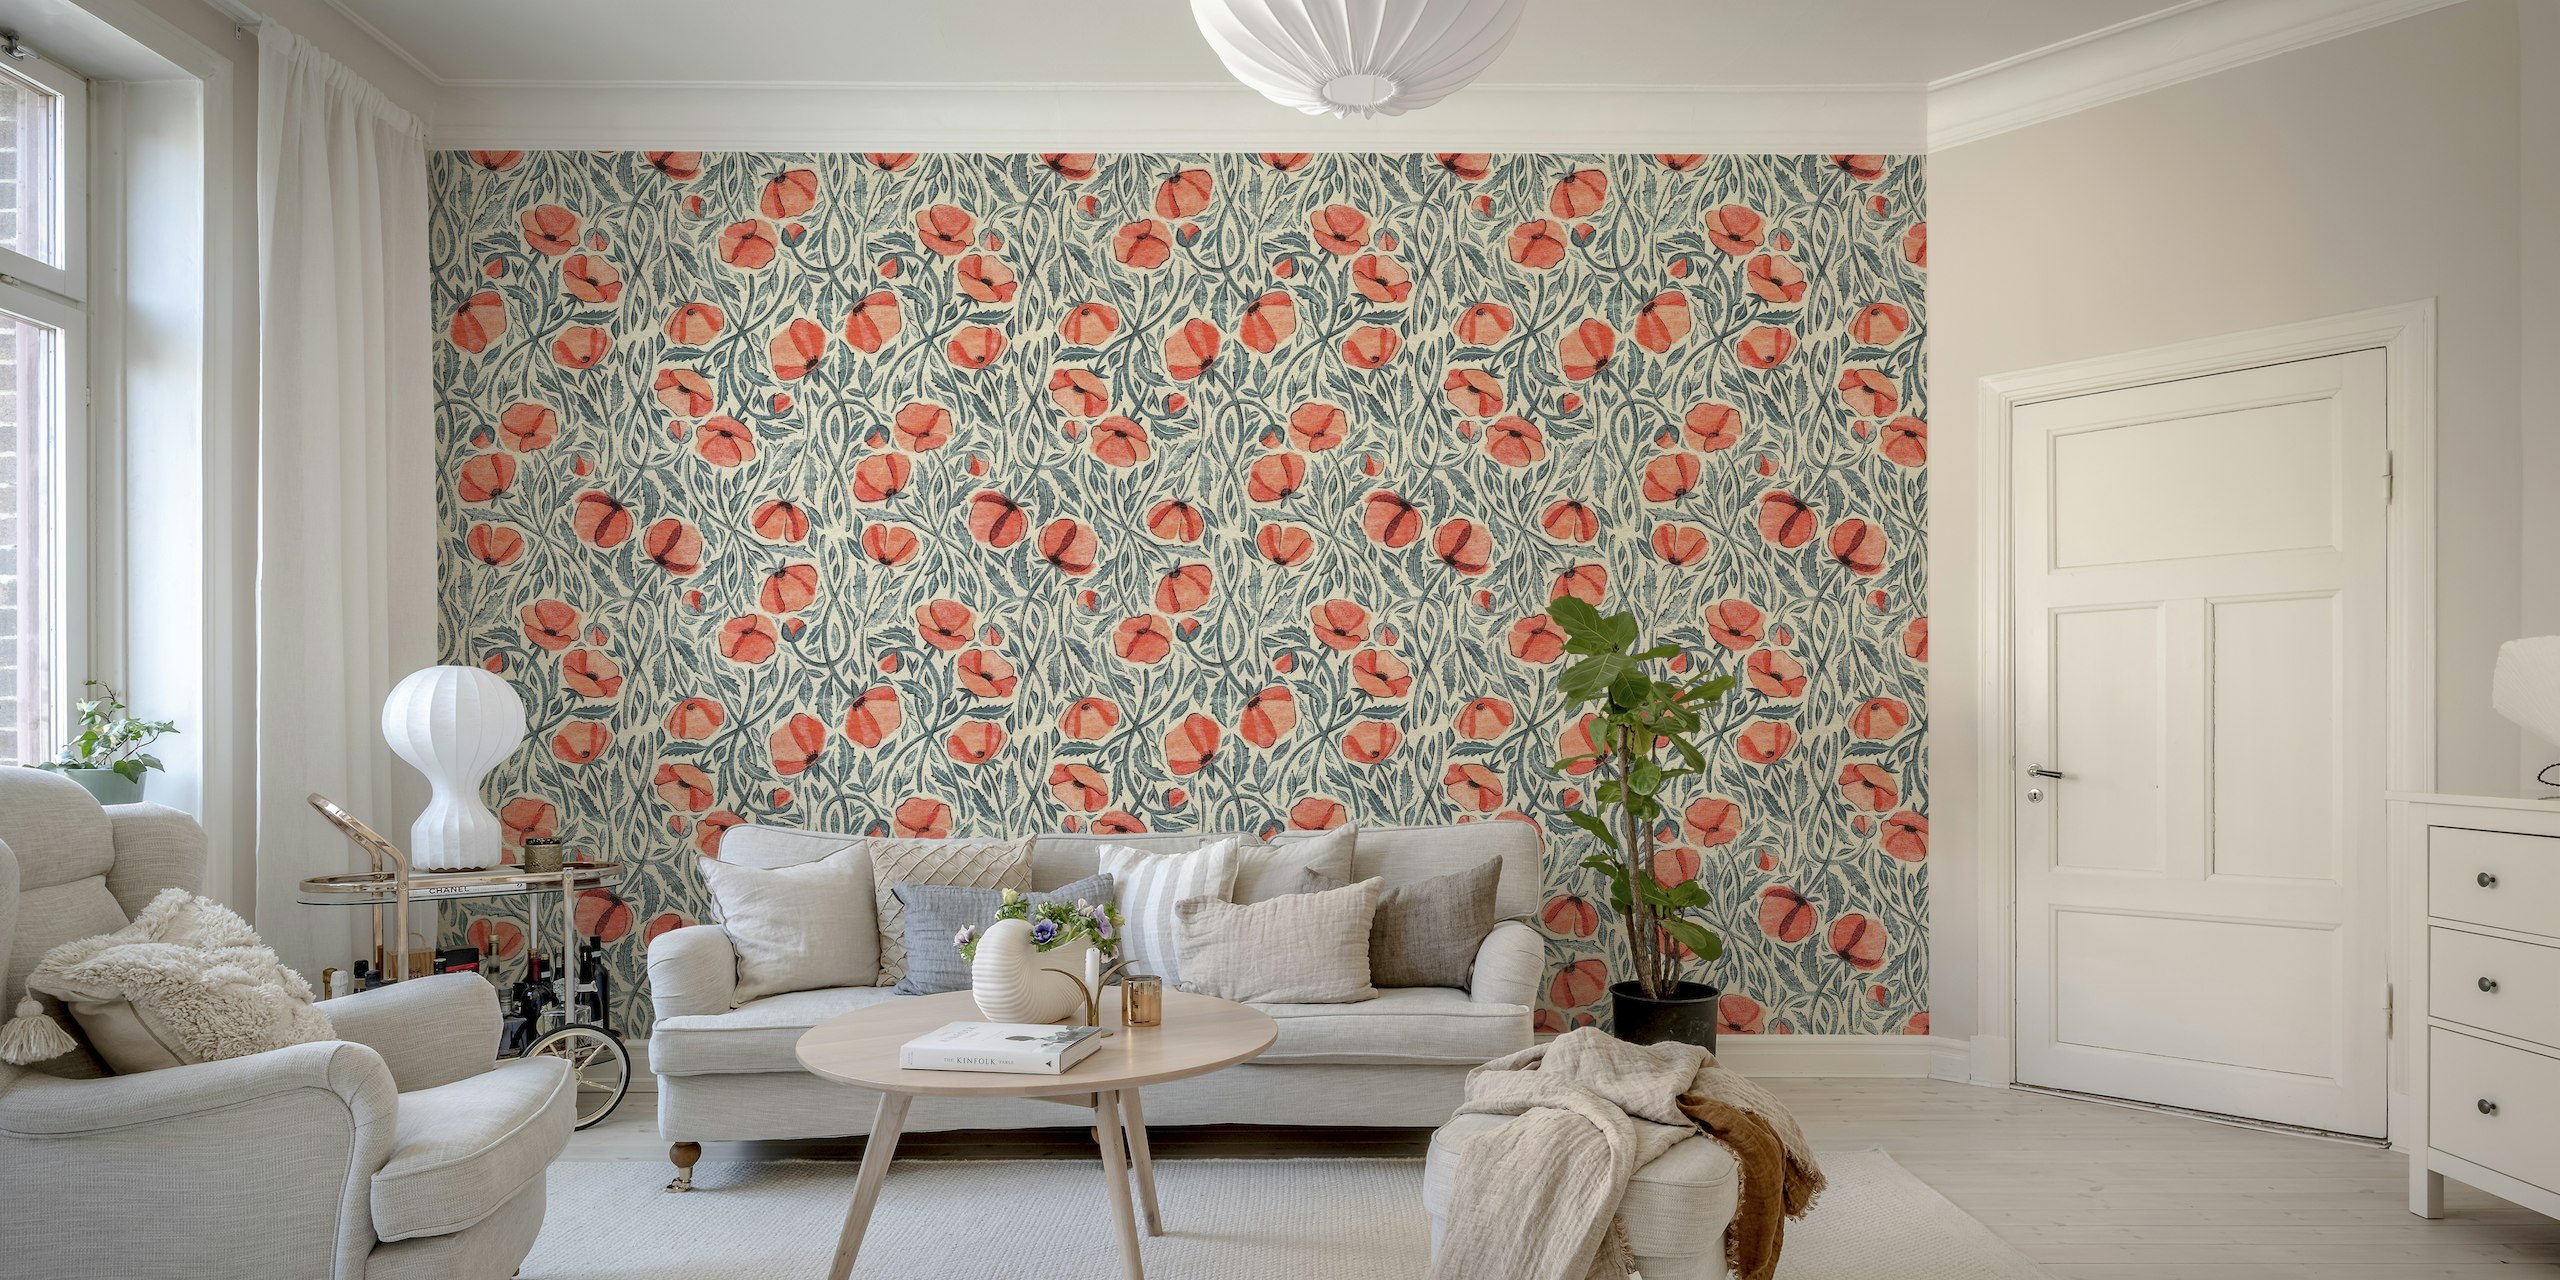 Peachy Coral Scattered Poppies wallpaper